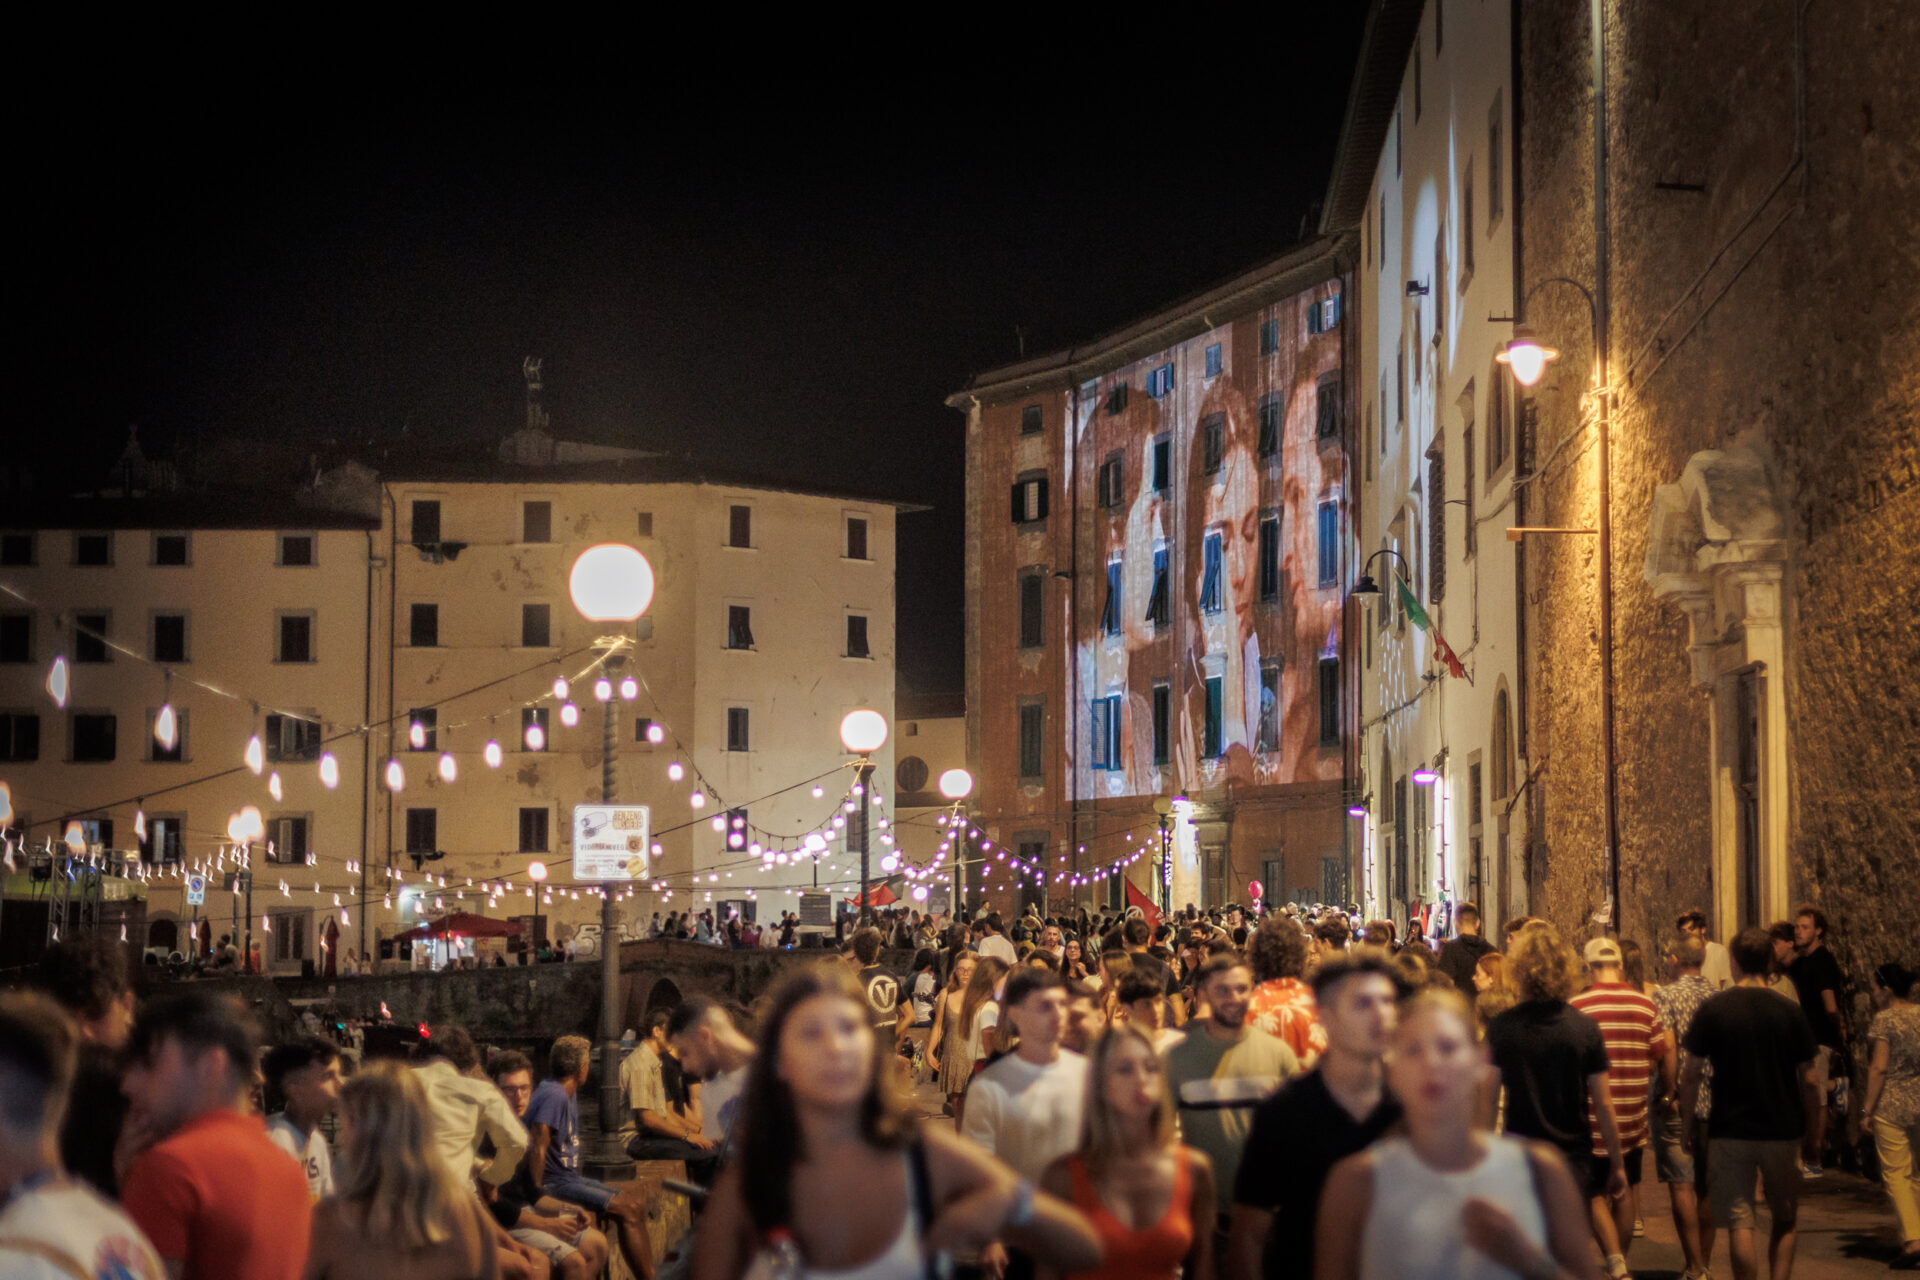 The great events of Livorno